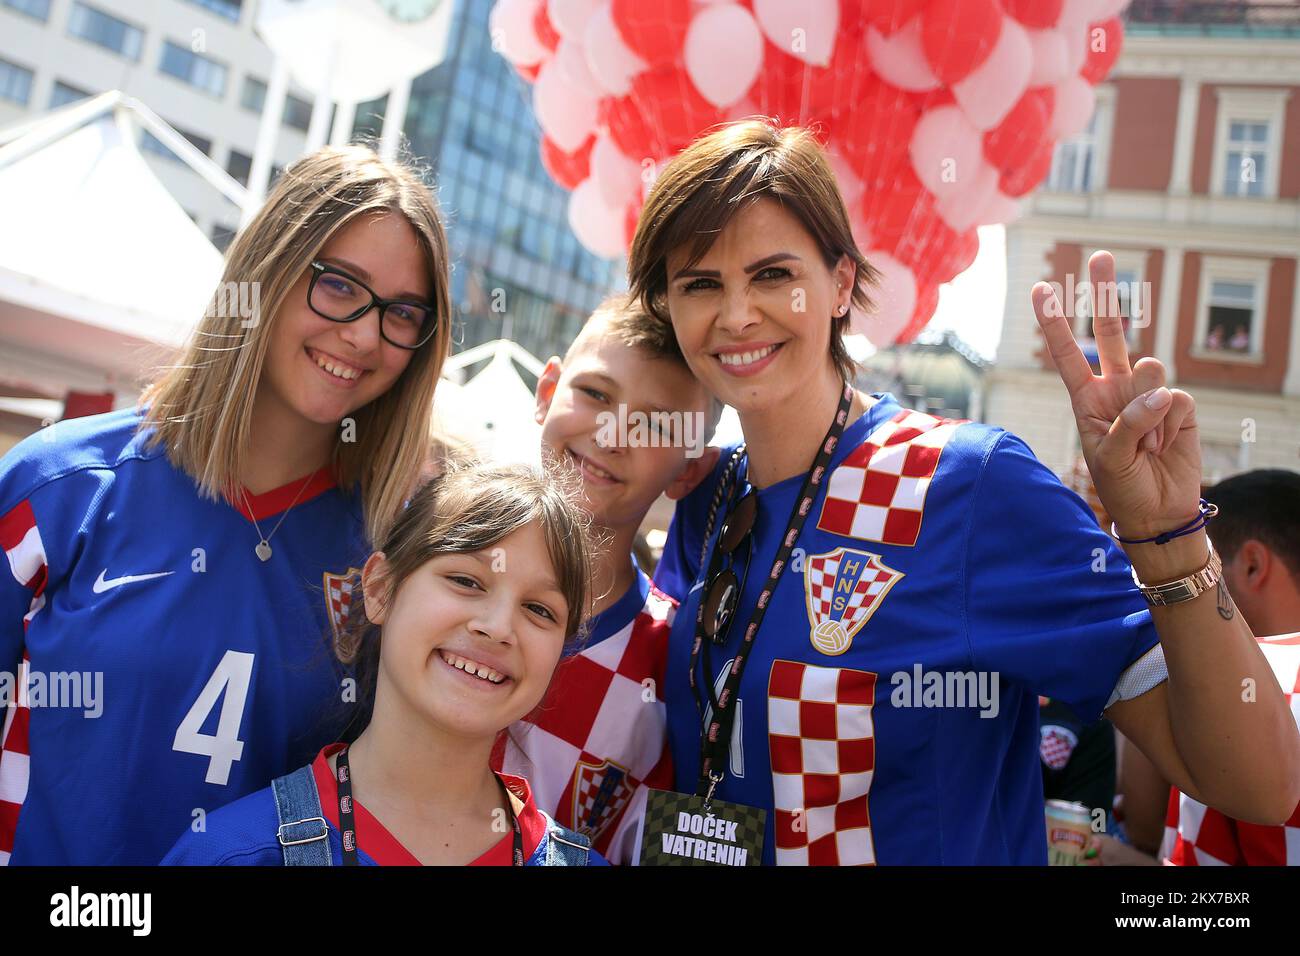 16.07.2018., Croatia, Zagreb - Ceremonial reception for Vatreni at Ban Josip Jelacic Square. Croatian national football team won second place at the 2018 World Cup in Russia. Anica Kovac Photo: Goran Stanzl/PIXSELL  Stock Photo